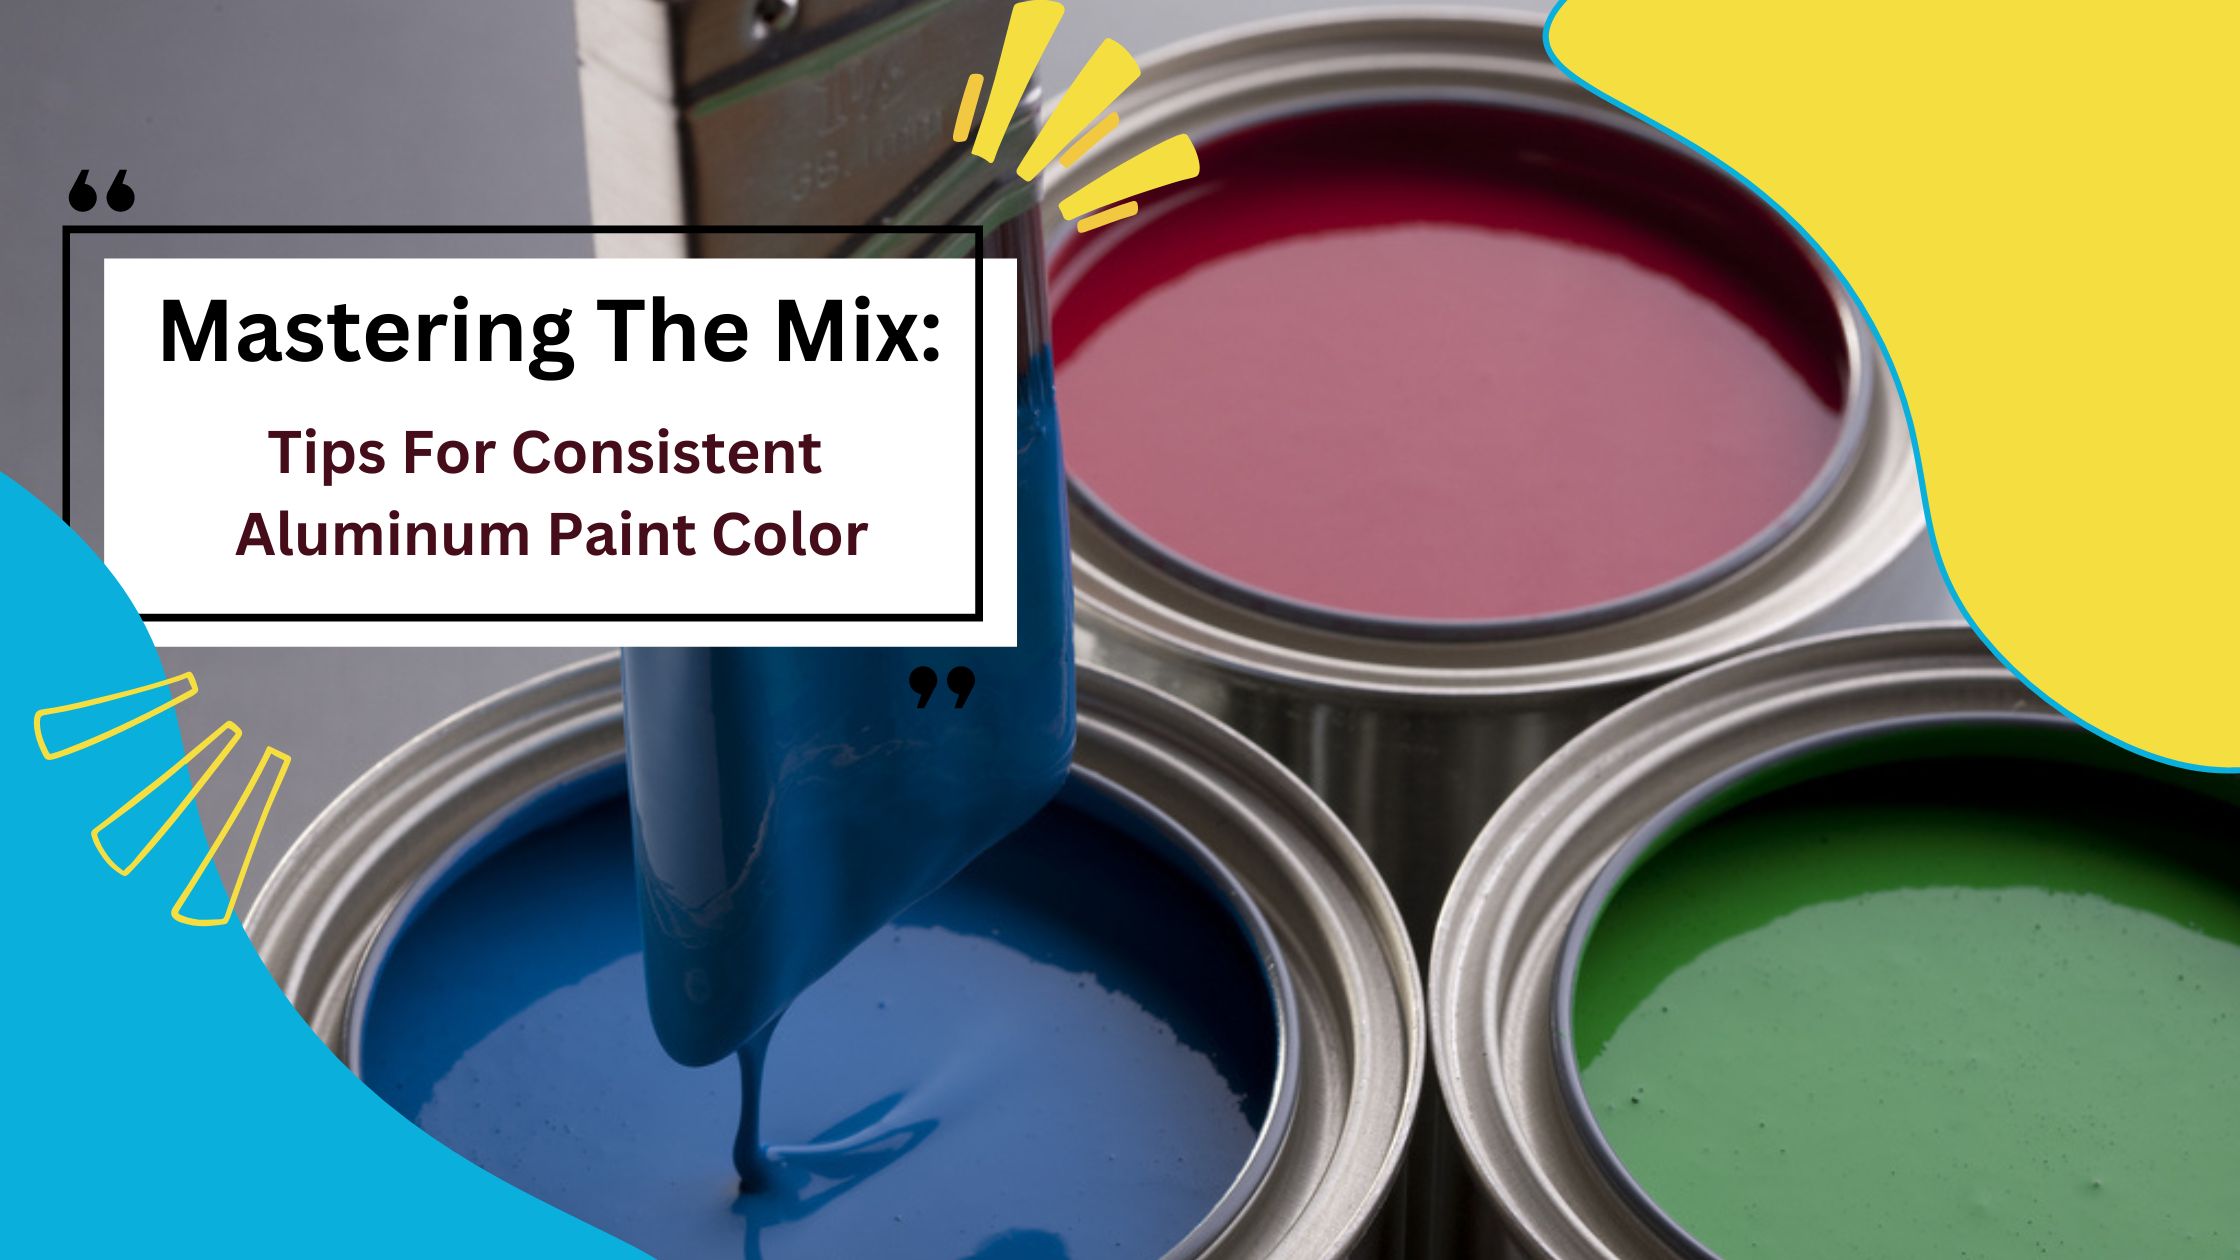 How To Mix Aluminum Paint For Consistent Color